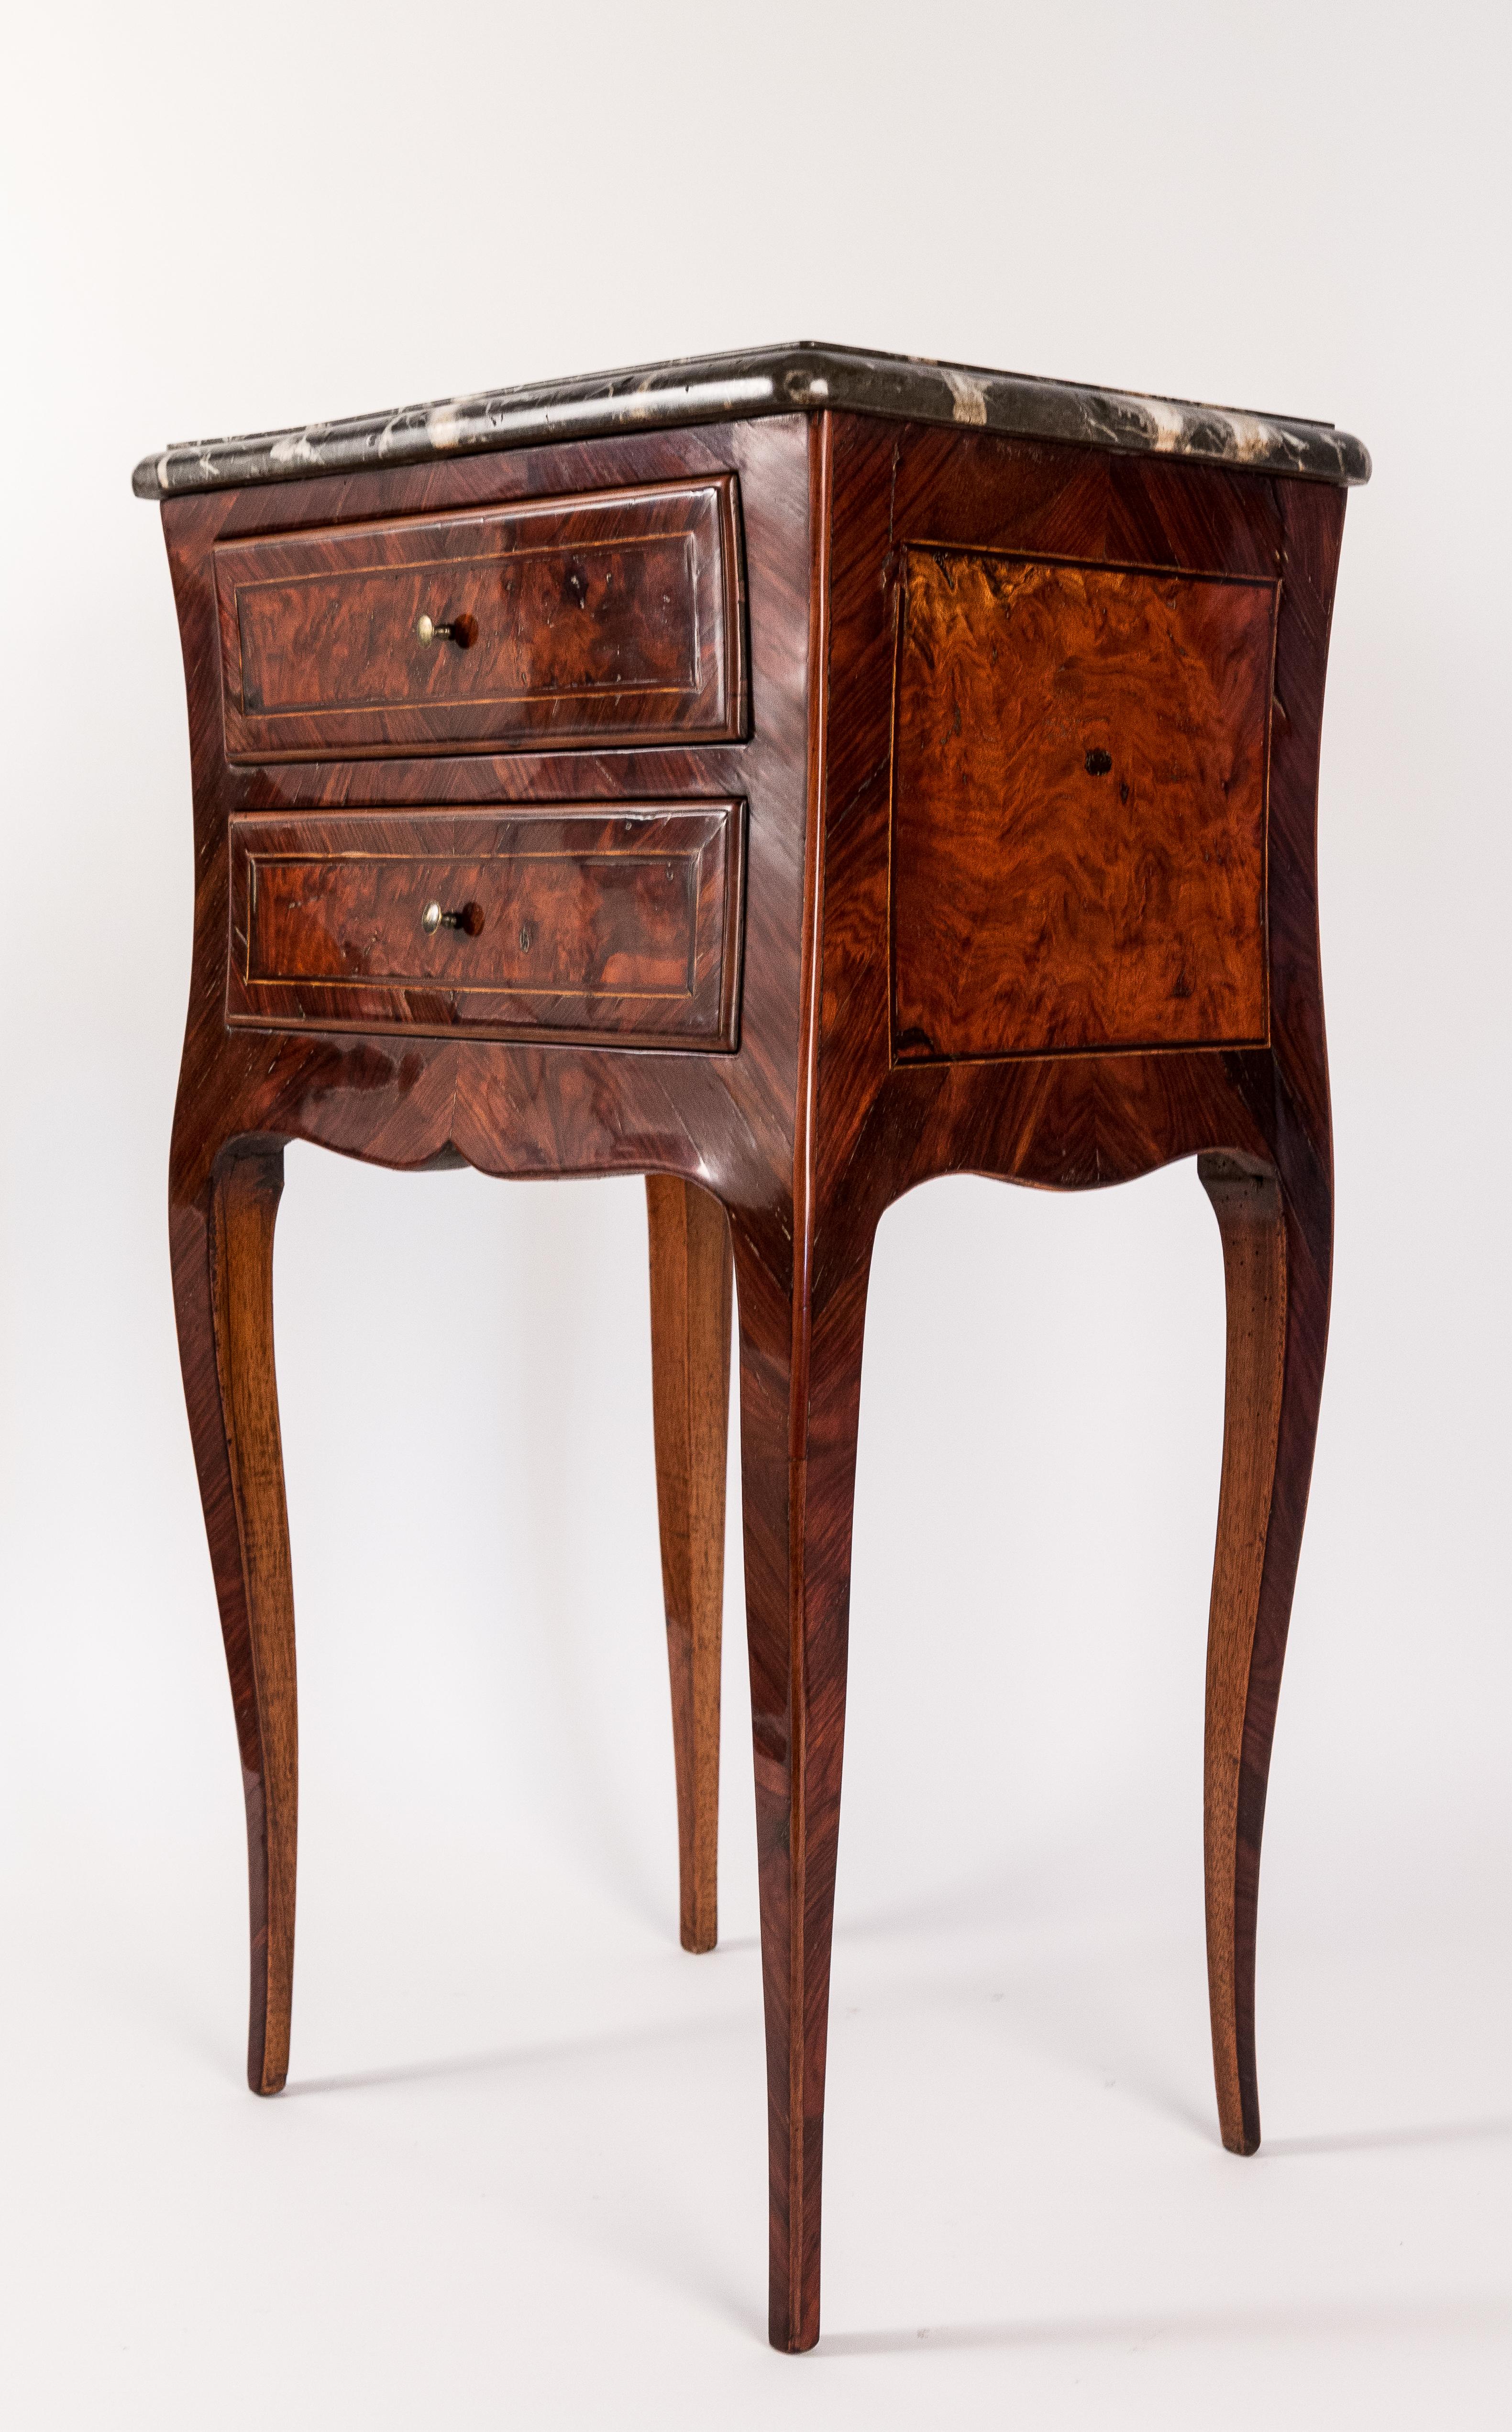 Veneer French Louis XV Style Small Serpentine Marble-Top Commode, circa 1820-1830